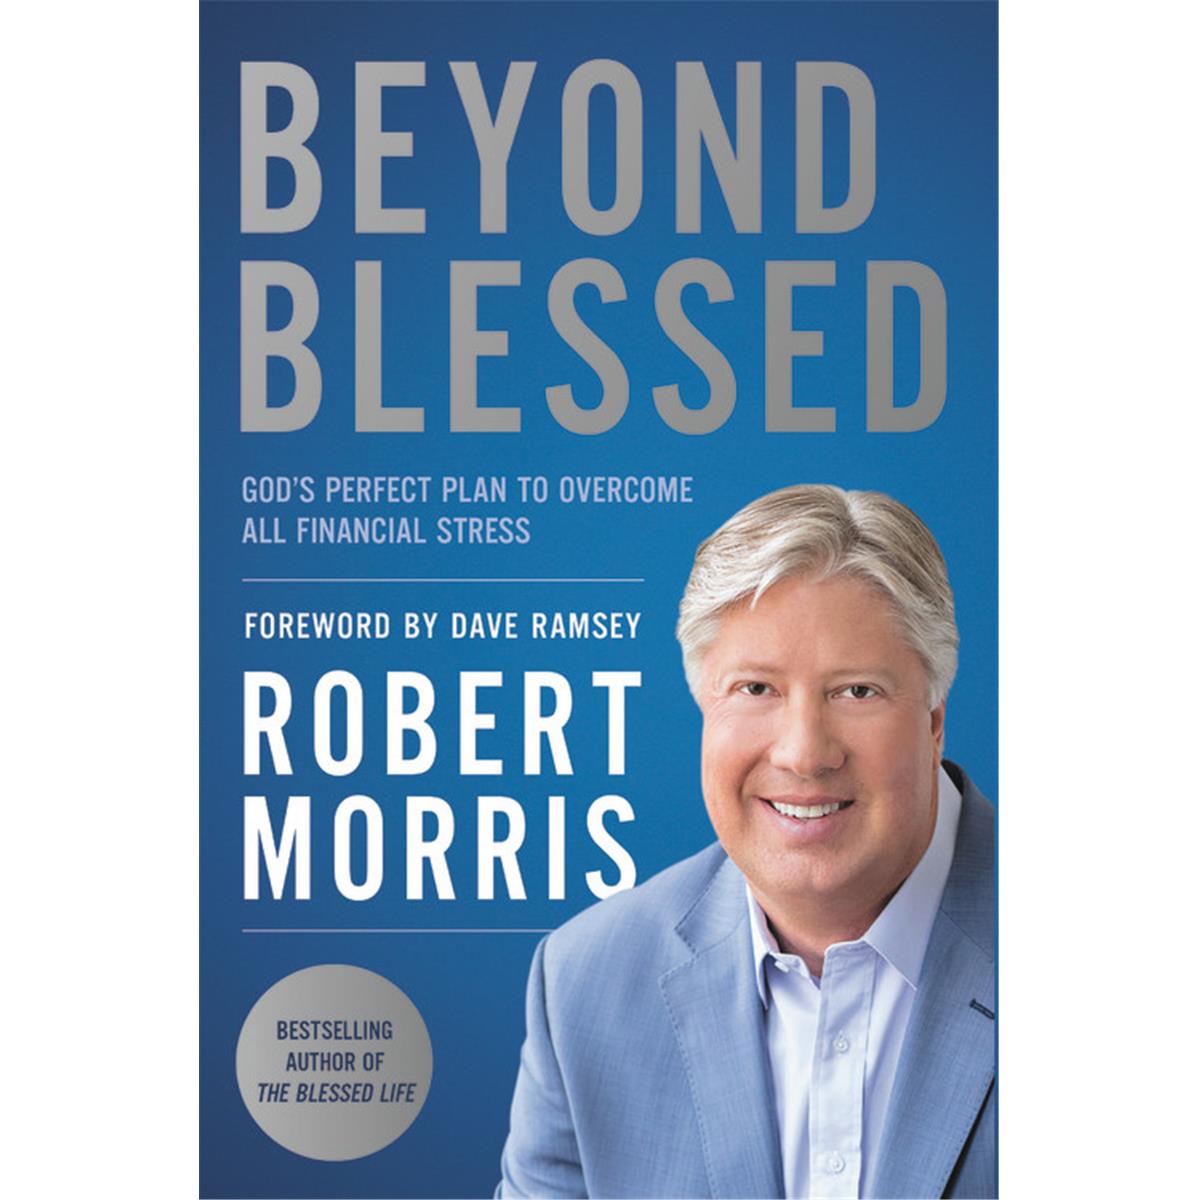 Faithwords & Hachette Book Group 147888 Beyond Blessed Softcover - Jan 2020